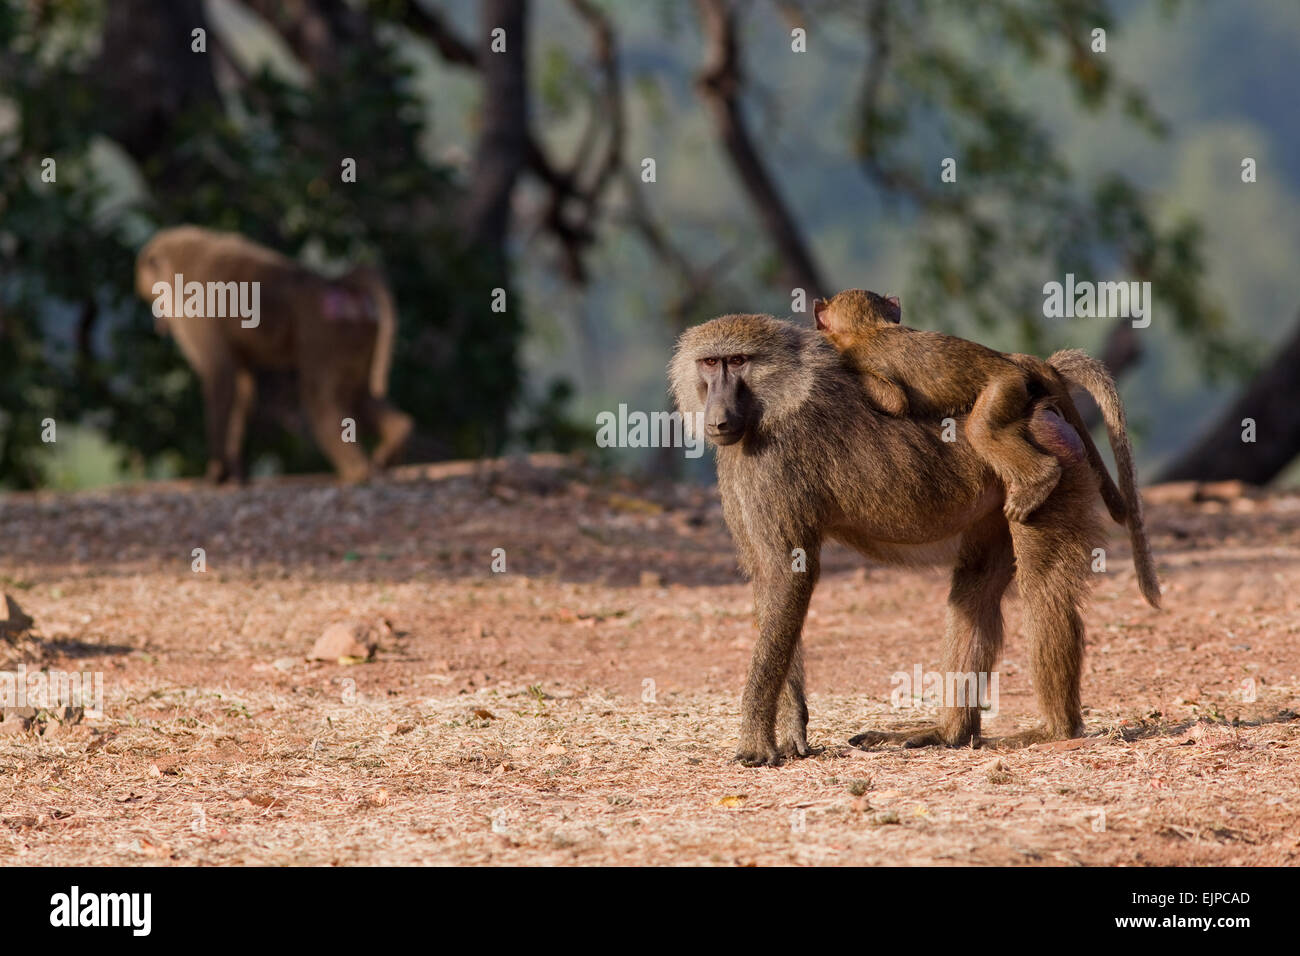 Olive or Anubis Baboons (Papio anubis). Female and young. Ghana. West Africa. Mole National Park. Stock Photo